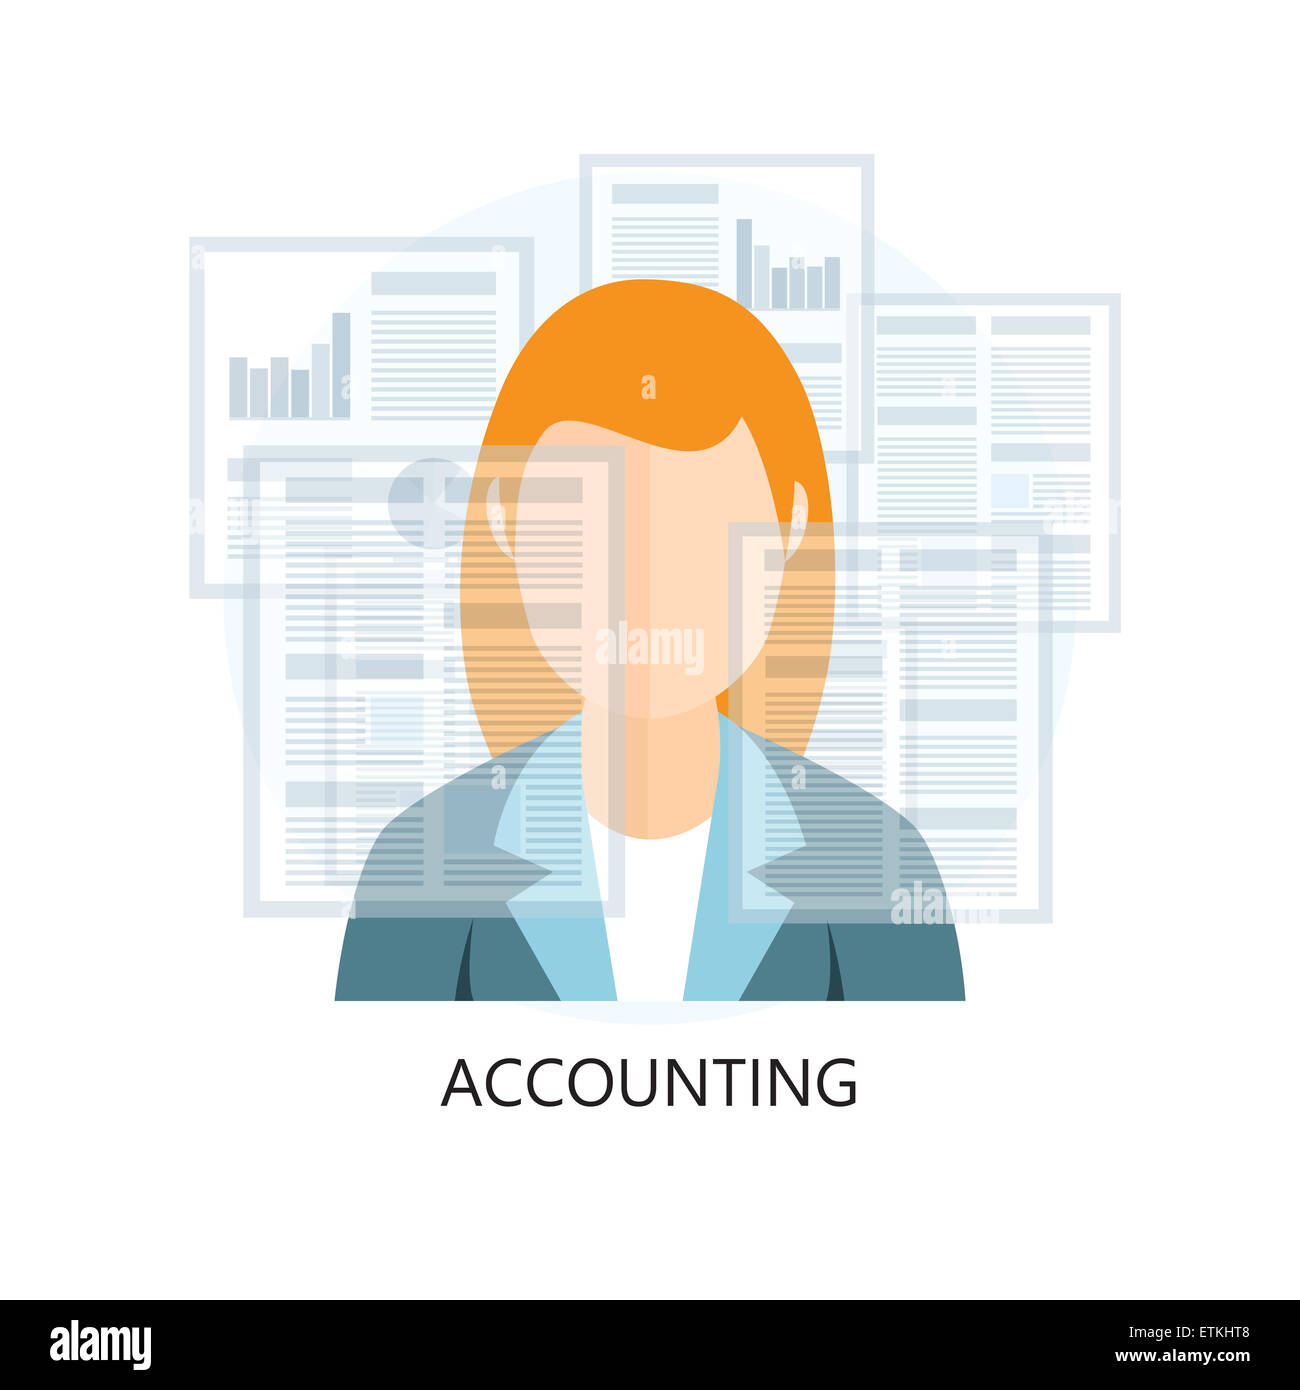 Accounting Icon with businesswoman Isolated on White Stock Photo